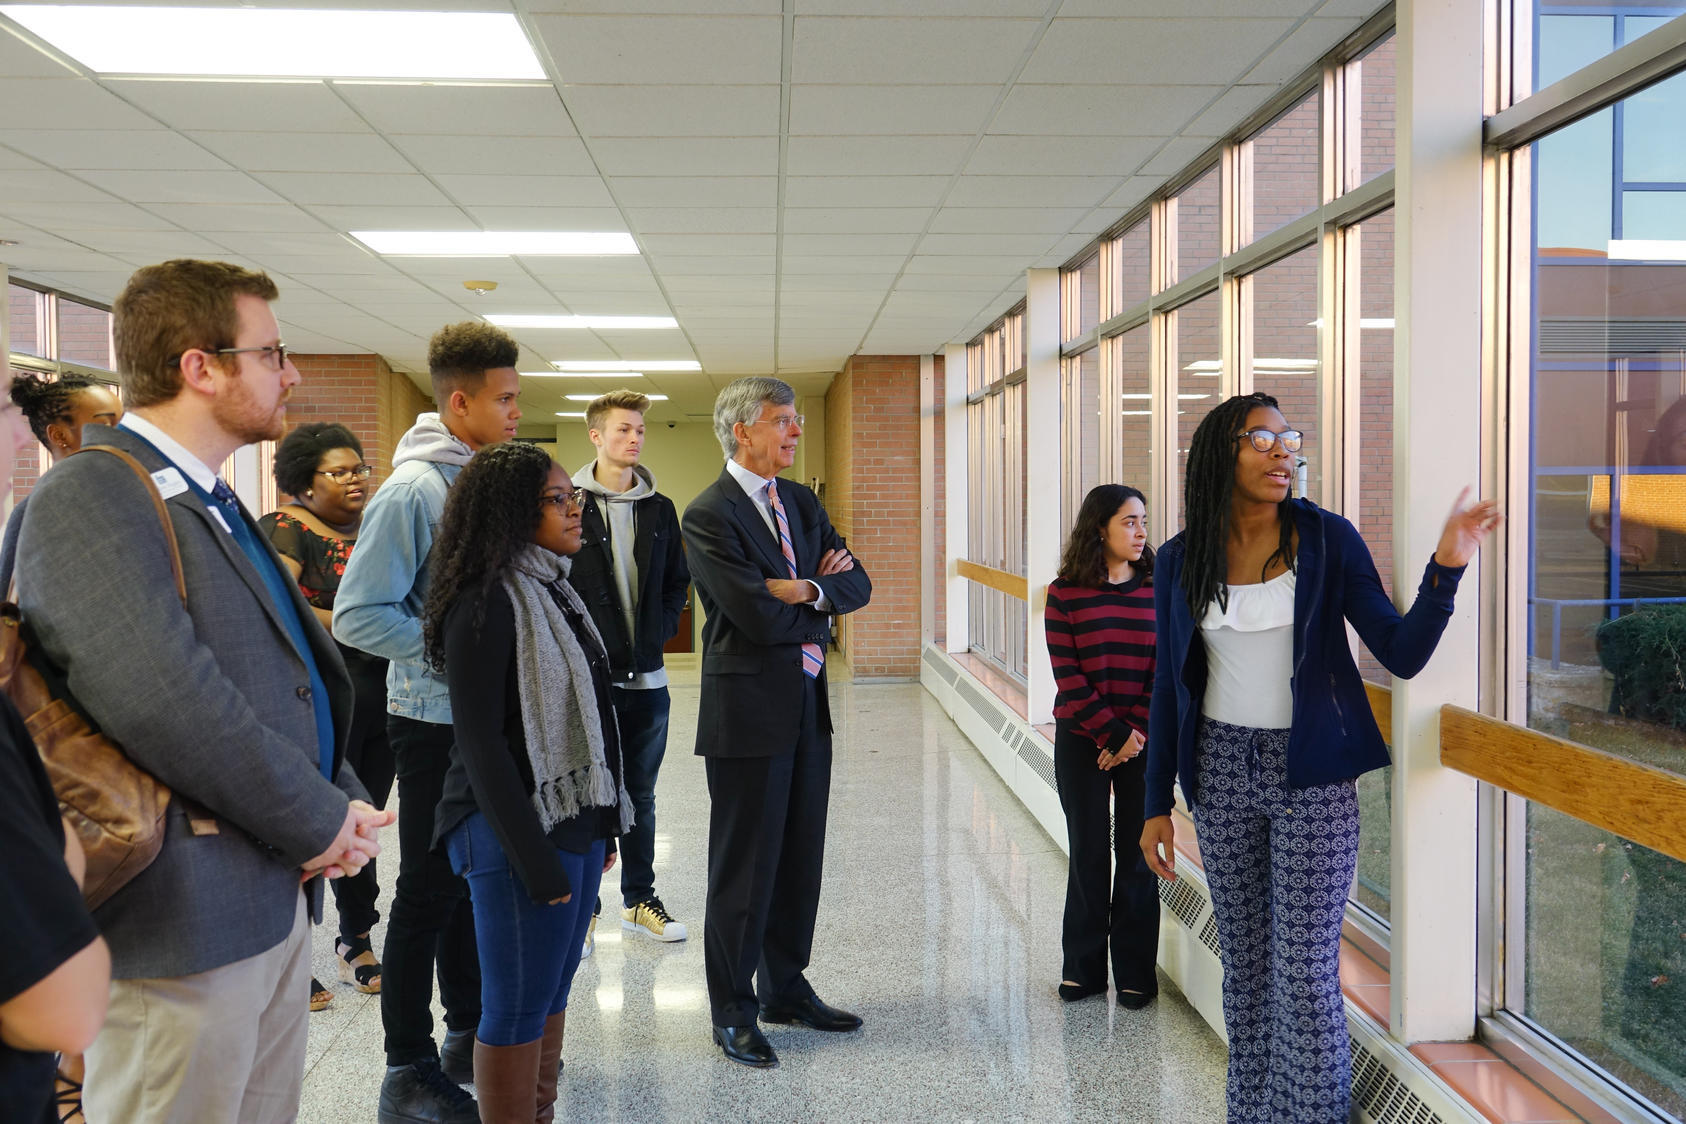 Students of Peace Teacher Amy Cameron providing USIP Executive Vice President William Taylor with a tour of their high school